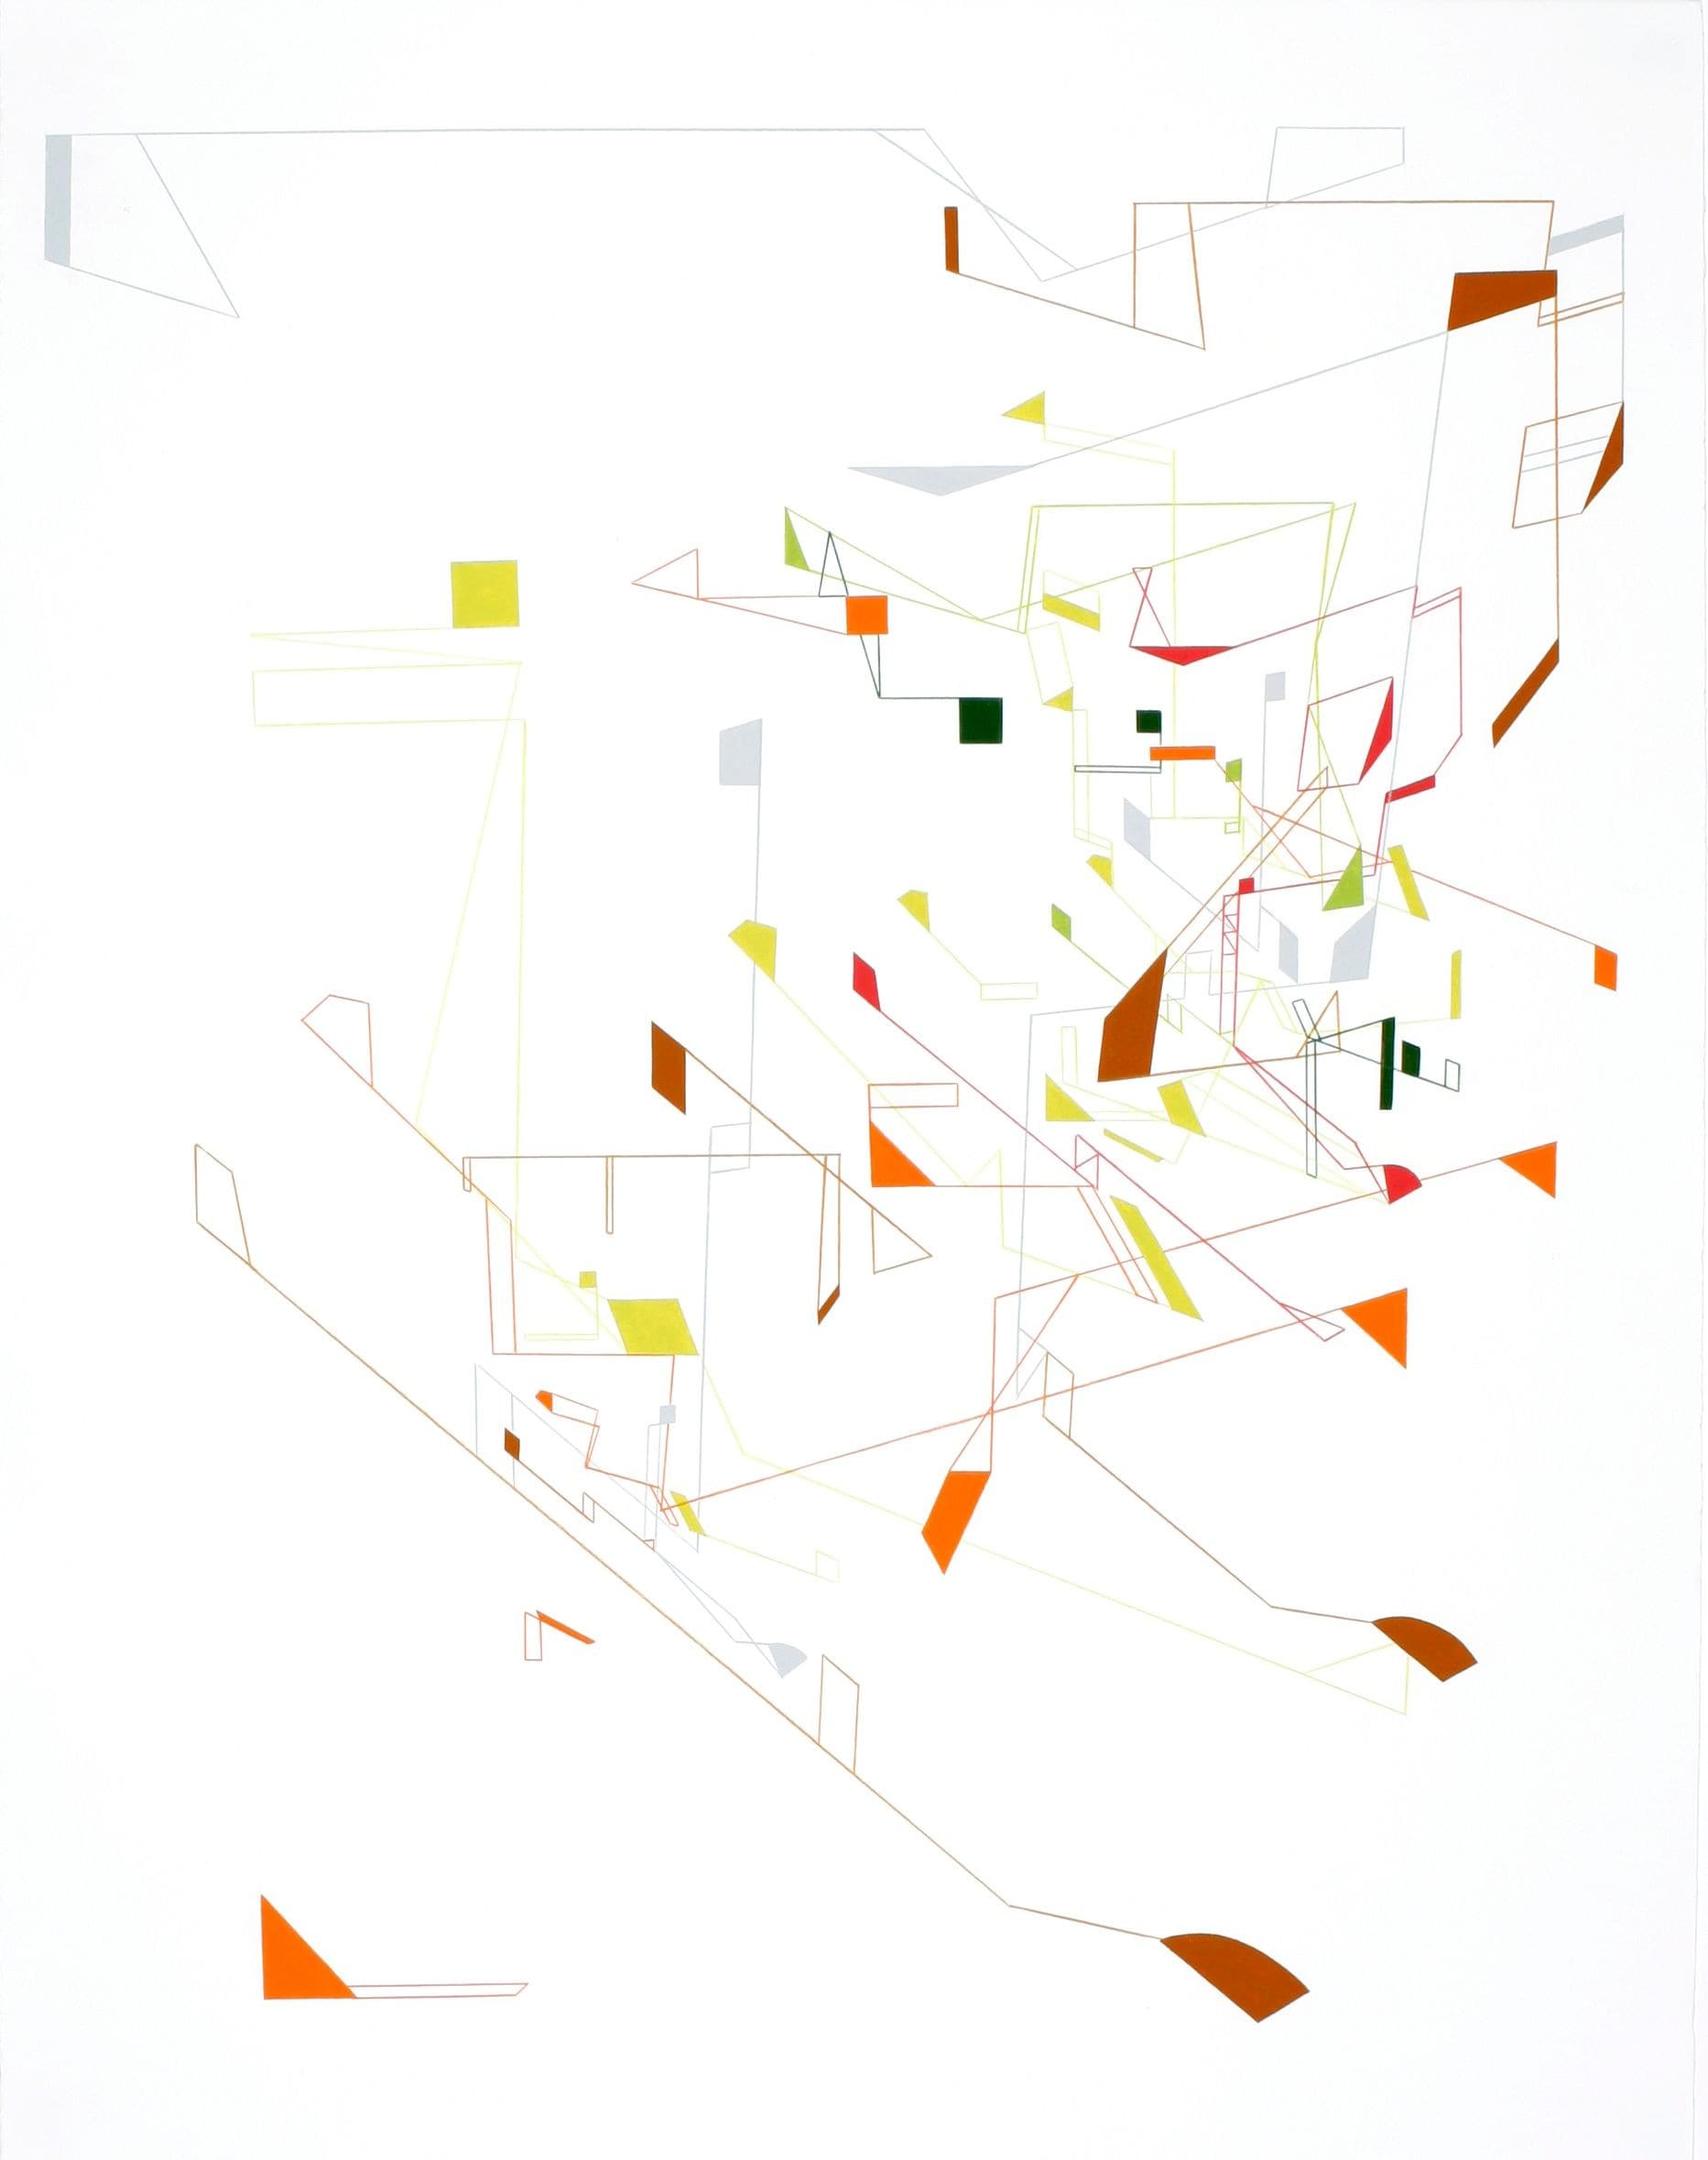 Spectral Variant #2a. 8
Colored pencil and gouache 
on paper
38 x 29.75 inches, 2008